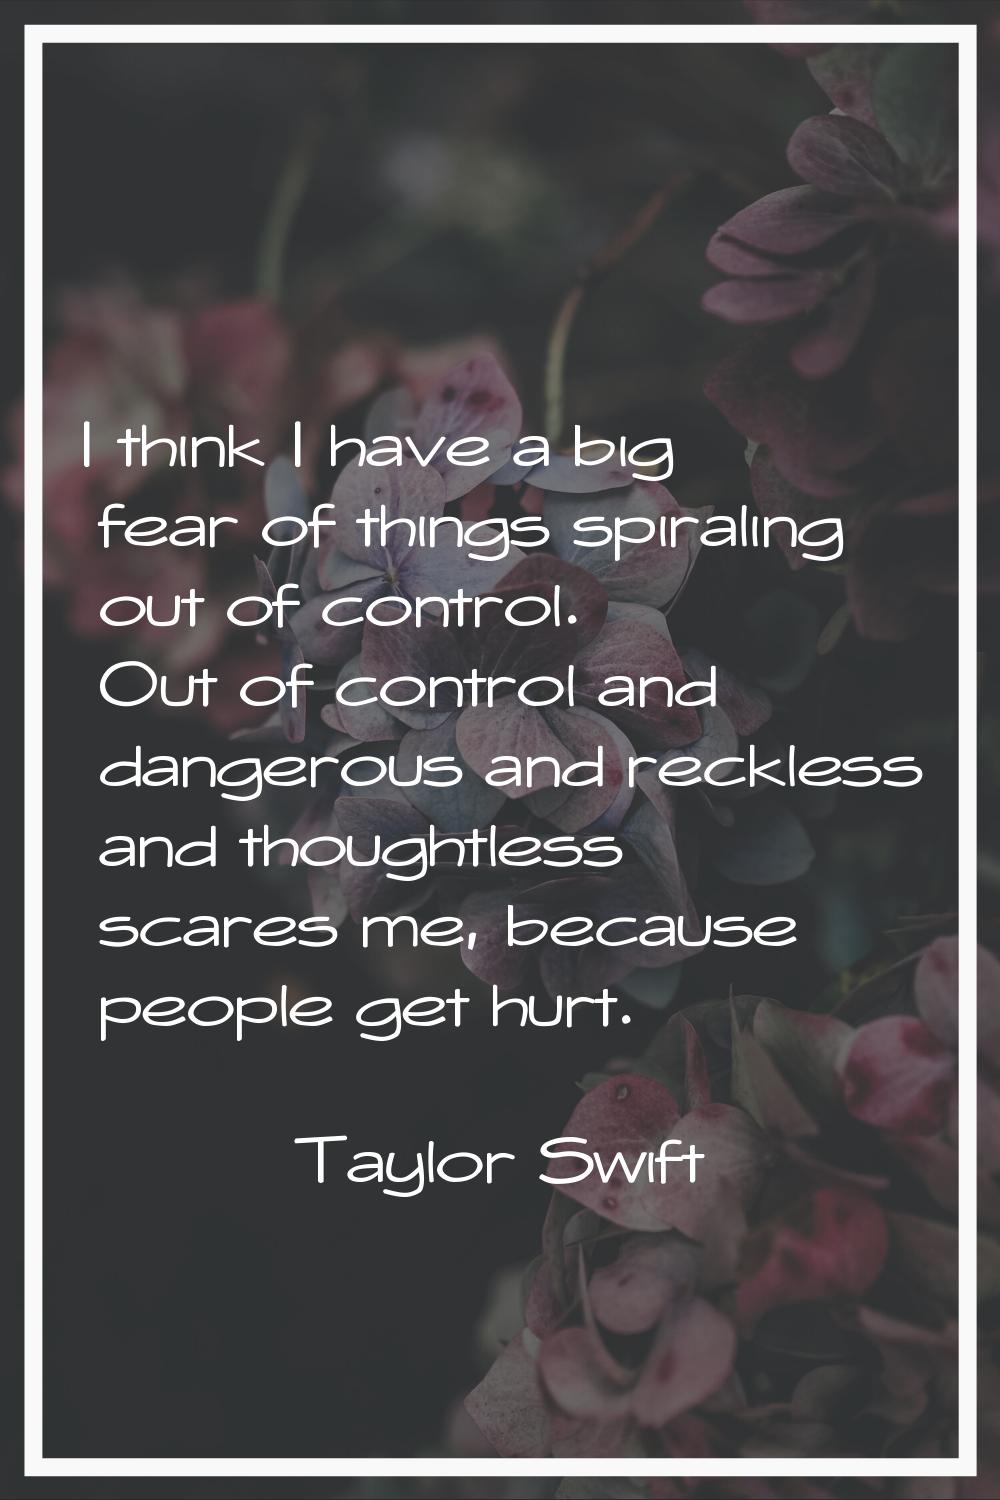 I think I have a big fear of things spiraling out of control. Out of control and dangerous and reck